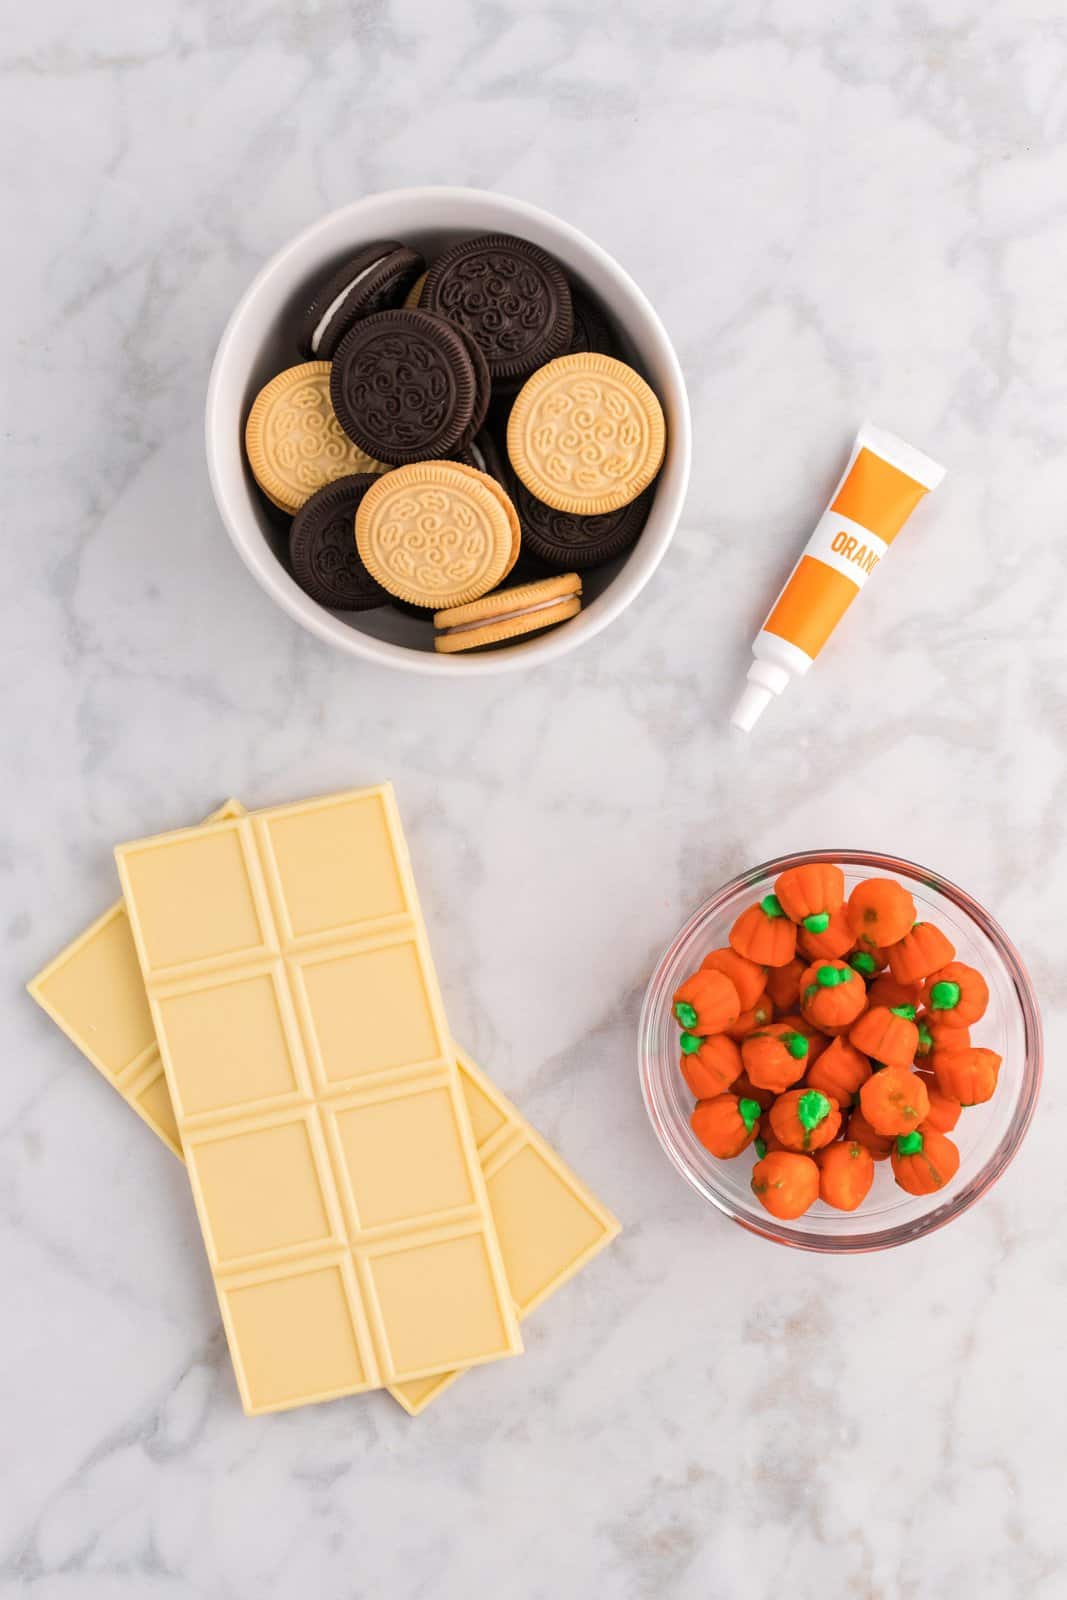 Ingredients needed: vanilla and chocolate sandwich creme cookies, white melting chocolate, orange gel food coloring and mellowcreme pumpkin candies.